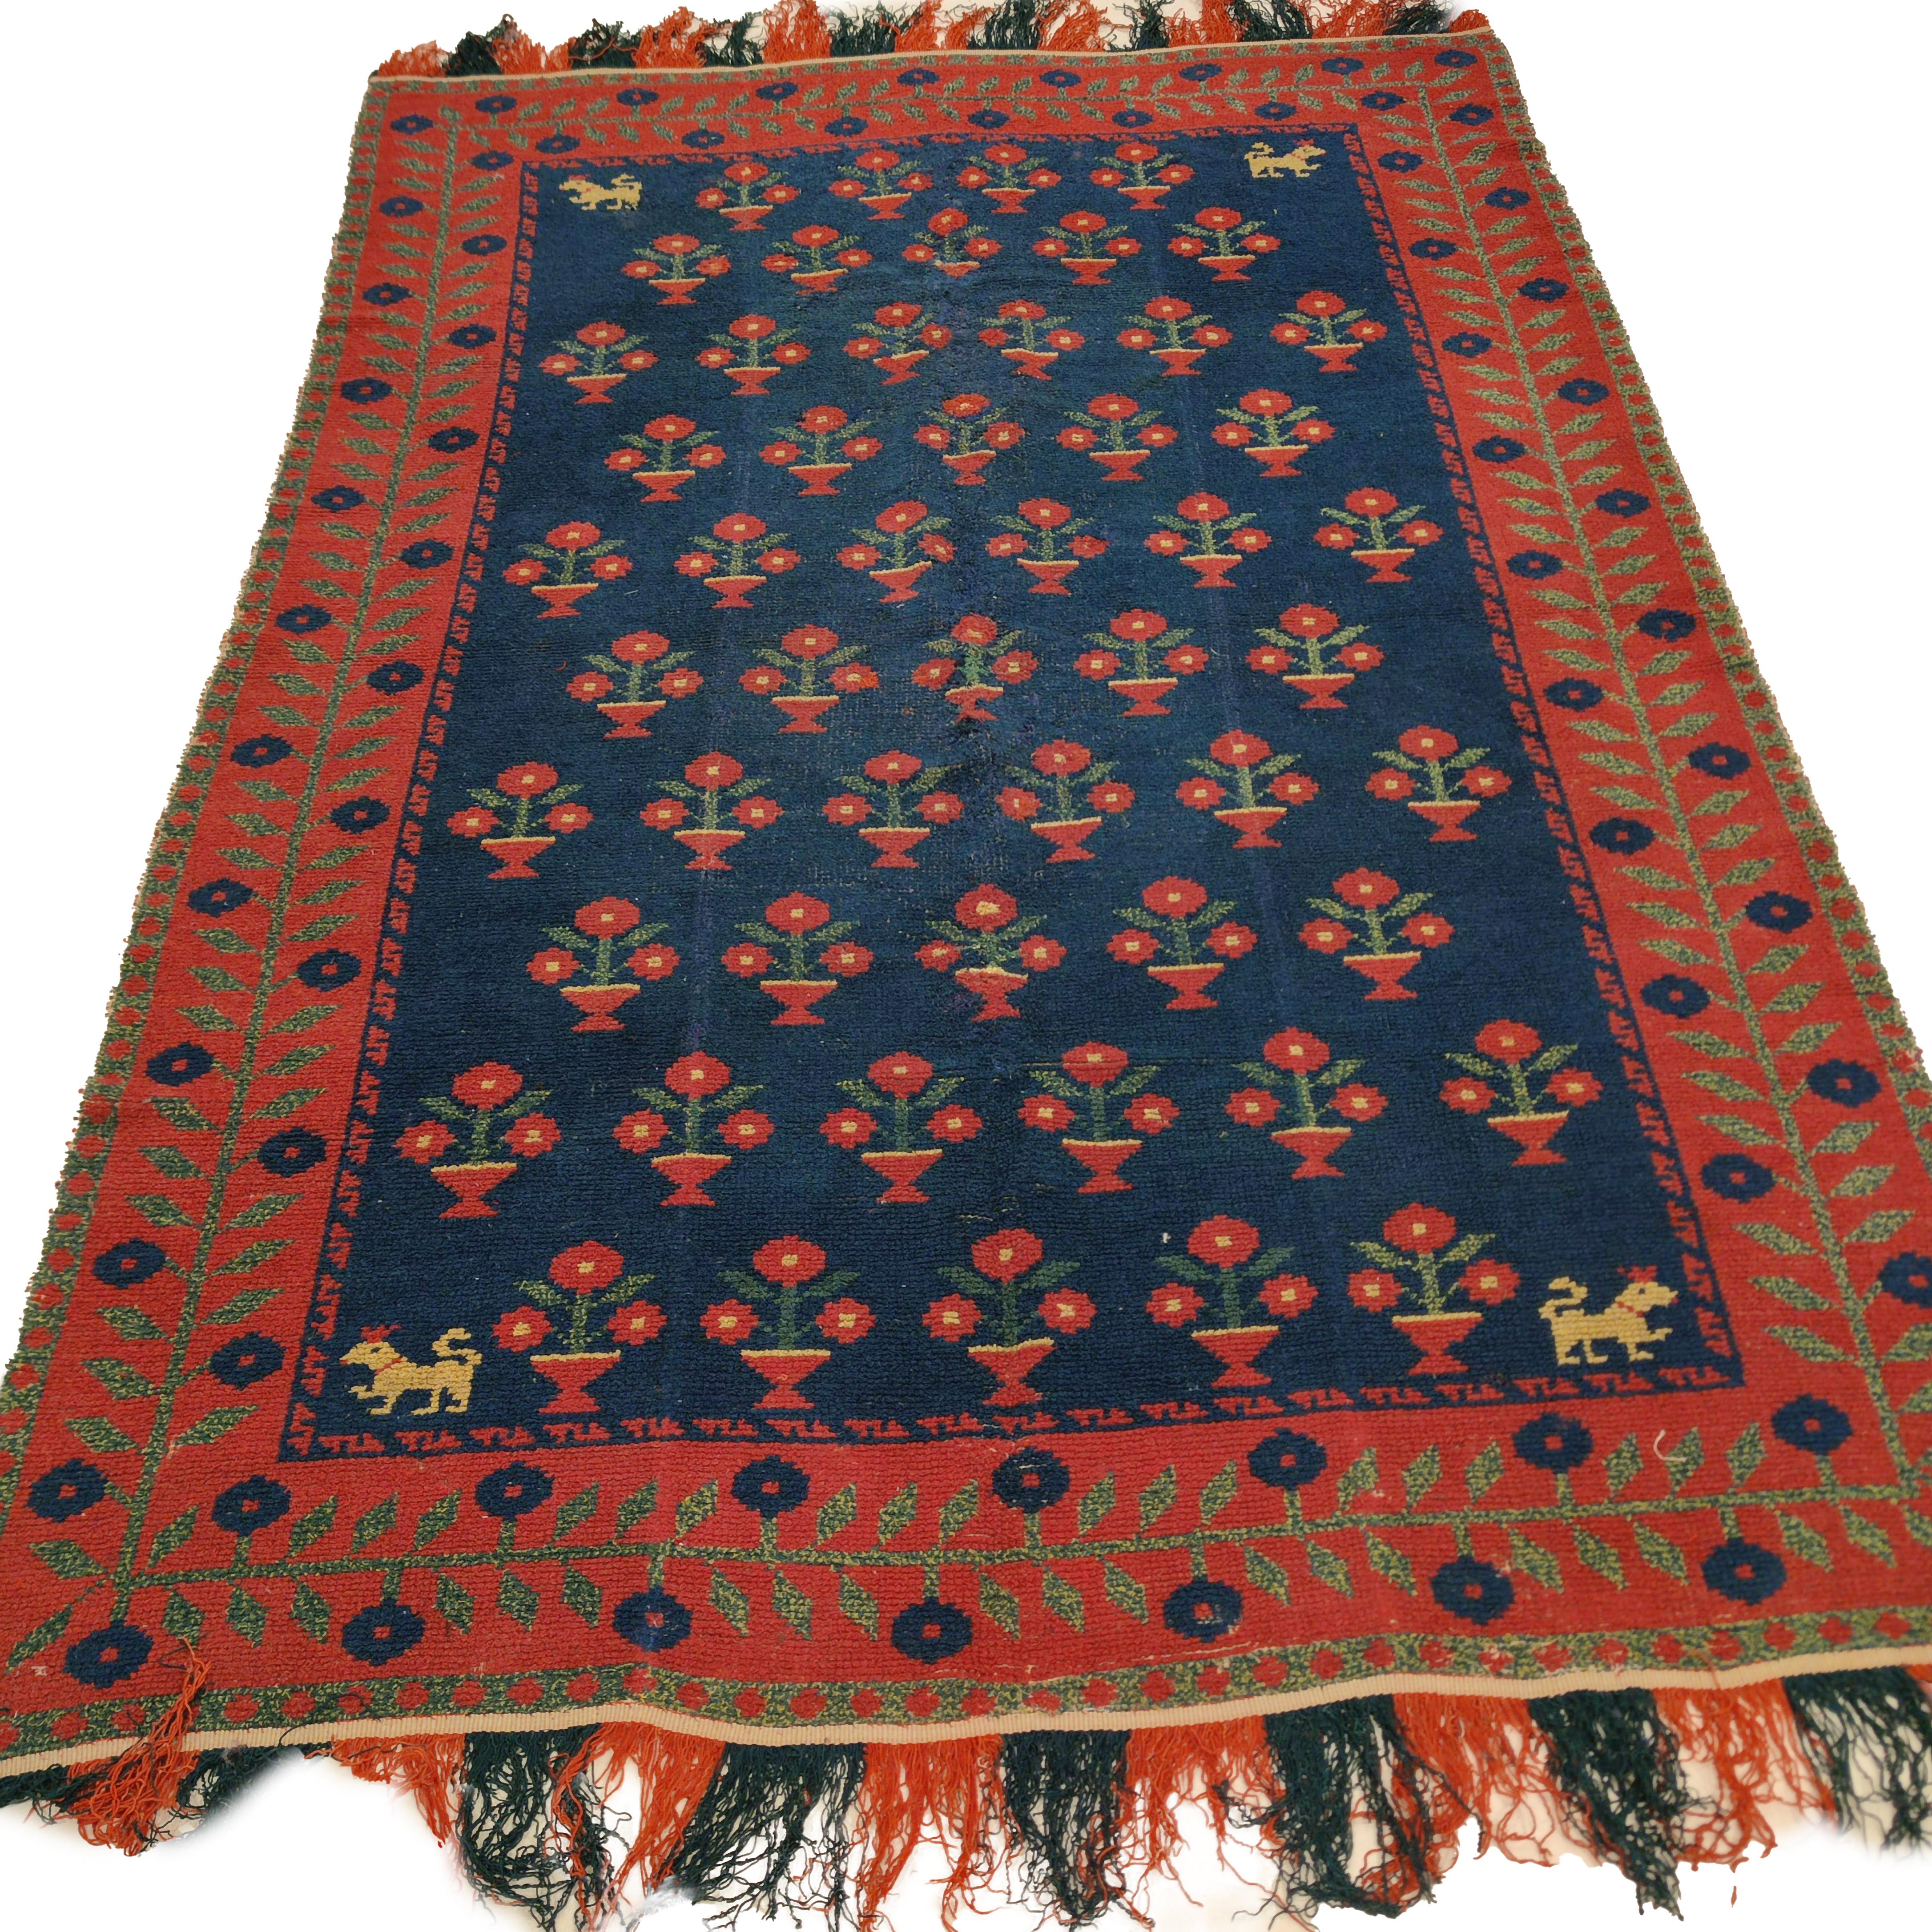 Alpujarra rugs were traditionally woven between the 15th and the 19th centuries in the villages of the Alpujarra district, located in southern Spain in the Granada region. These are woven in wool on a linen foundation by means of a loop pile